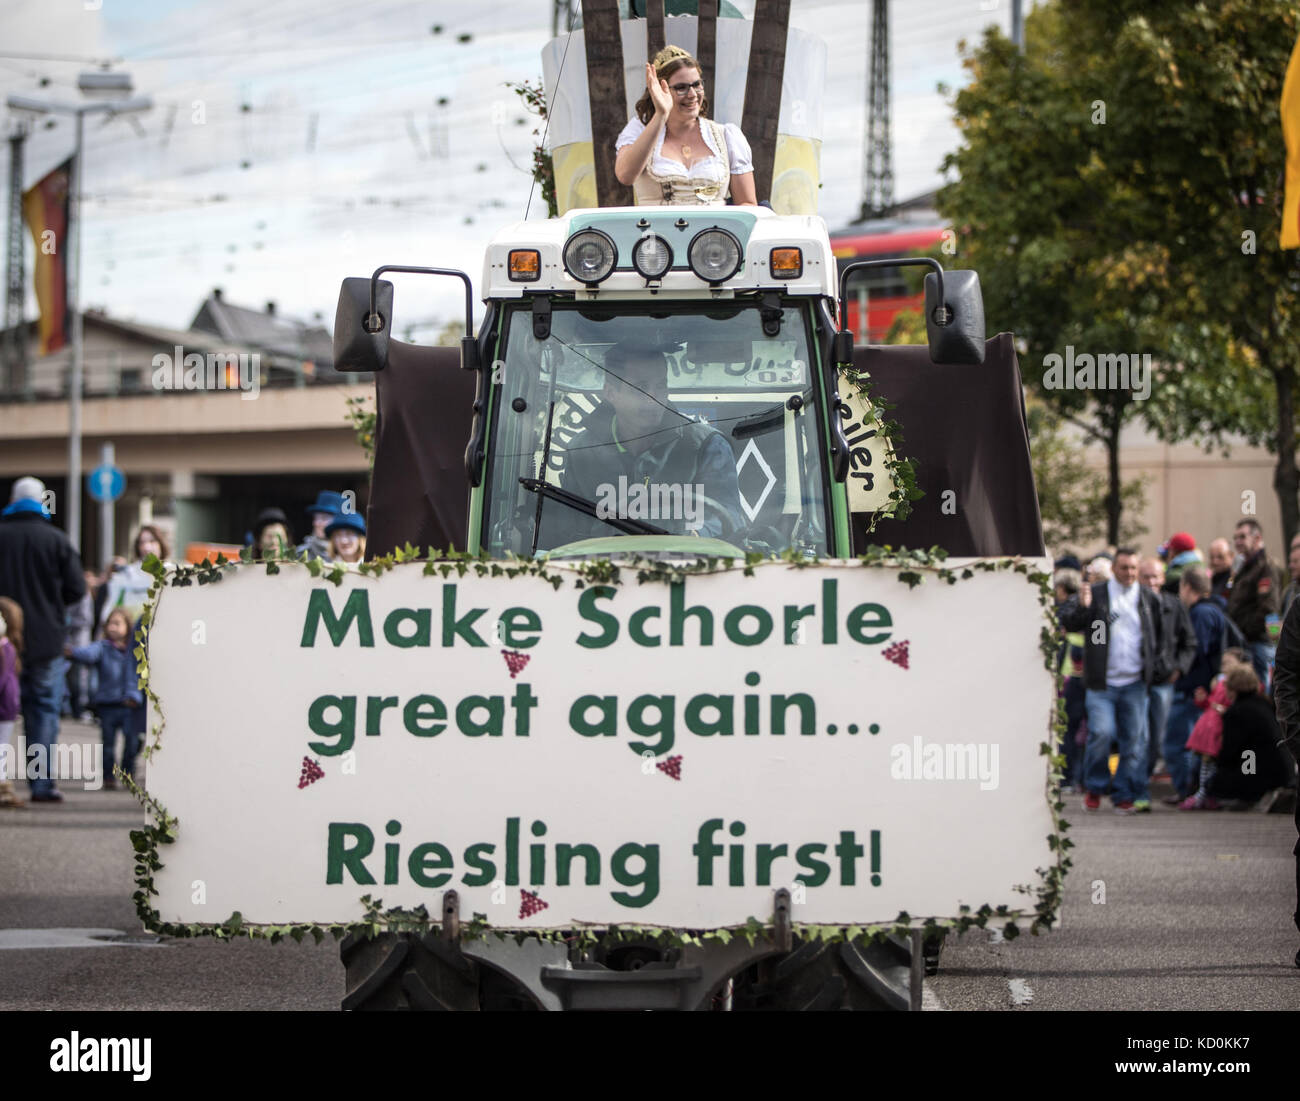 A wagon with a sign reading 'Make Schorle great again. Riesling first!' drives through the streets during the Vintner's Festive Parade in Neustadt an der Weinstraße, Germany, 8 October 2017. Photo: Frank Rumpenhorst/dpa Stock Photo